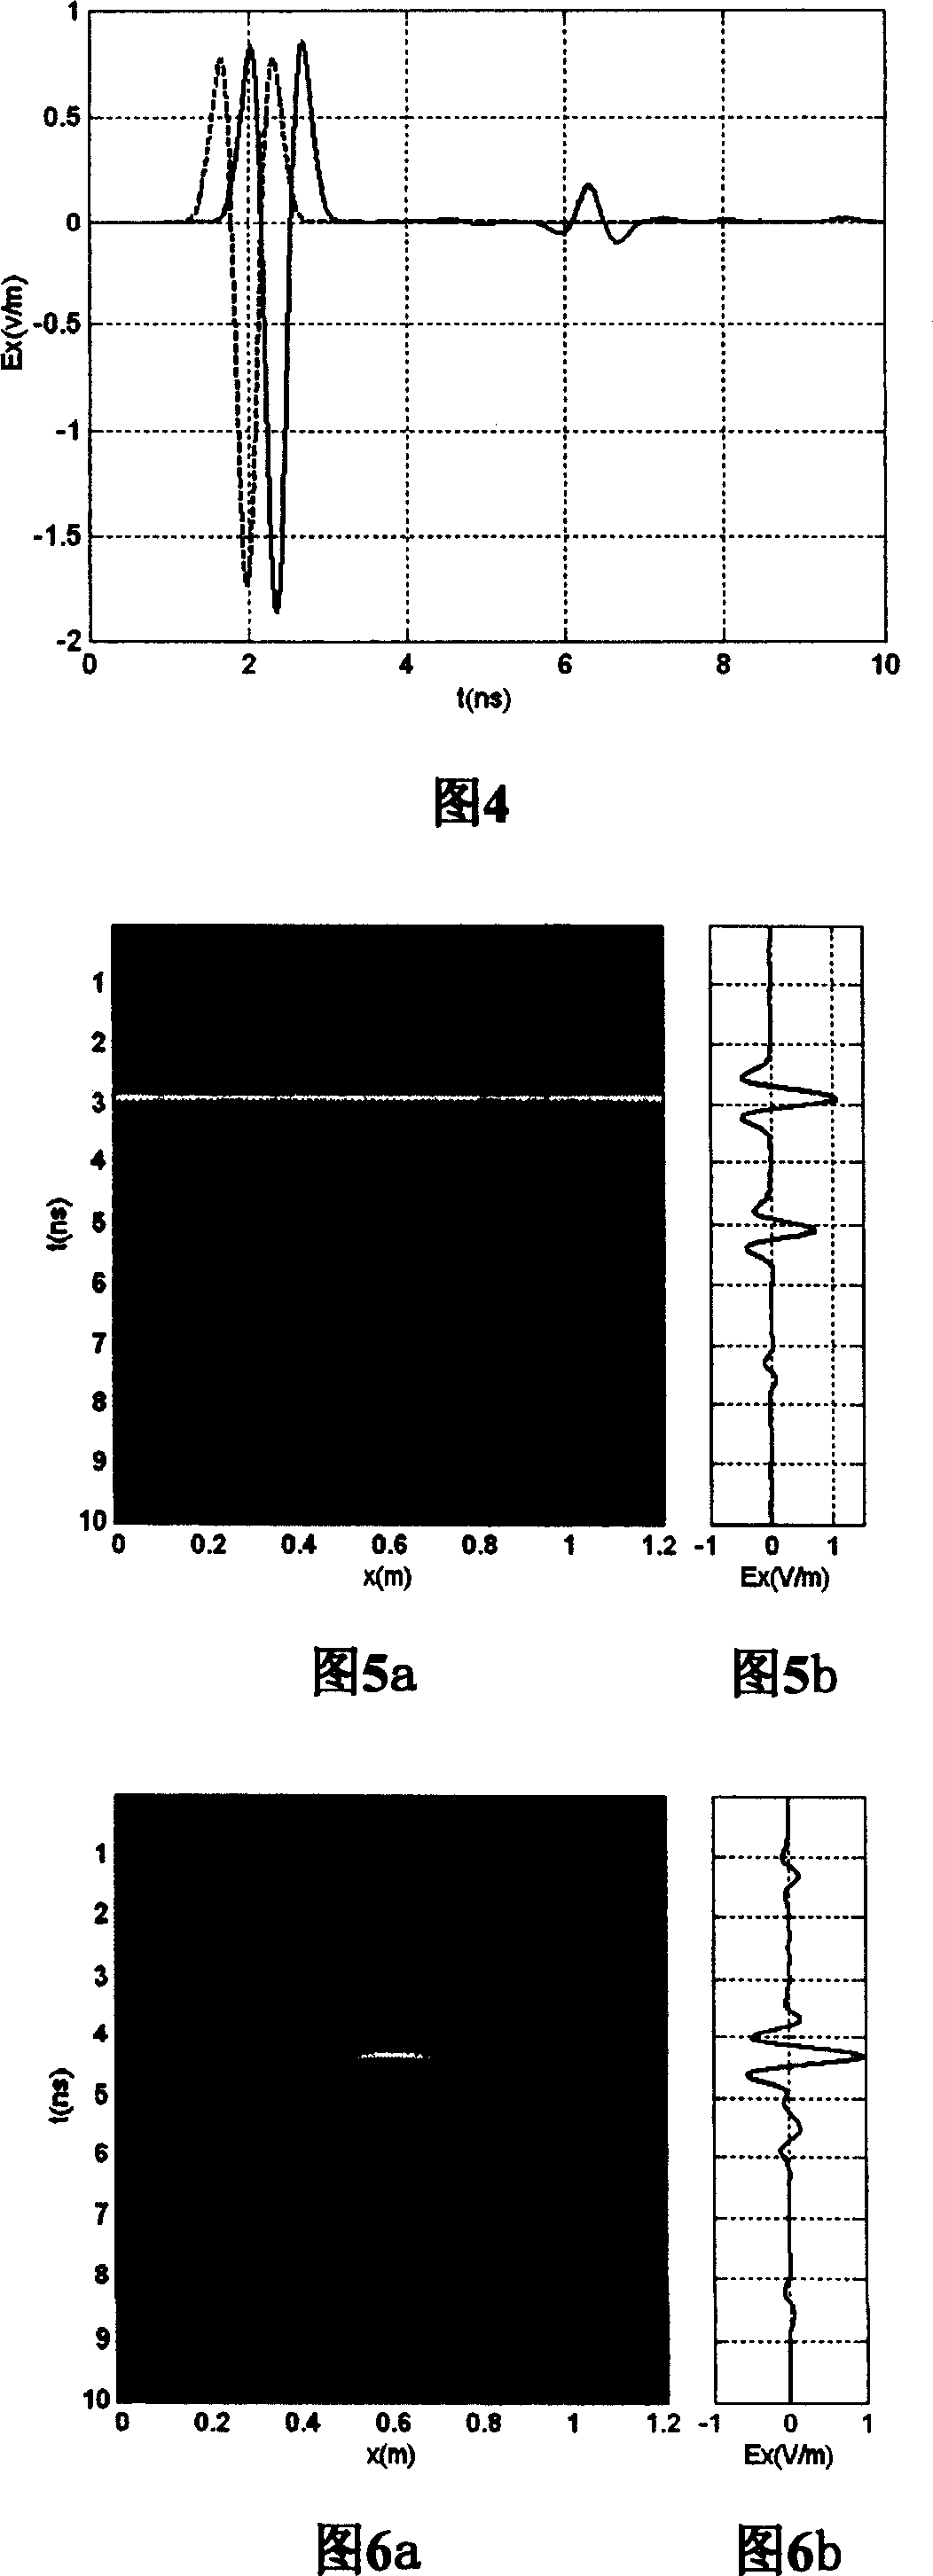 Impedance matching device for broad band impulse signal ground penetrating radar